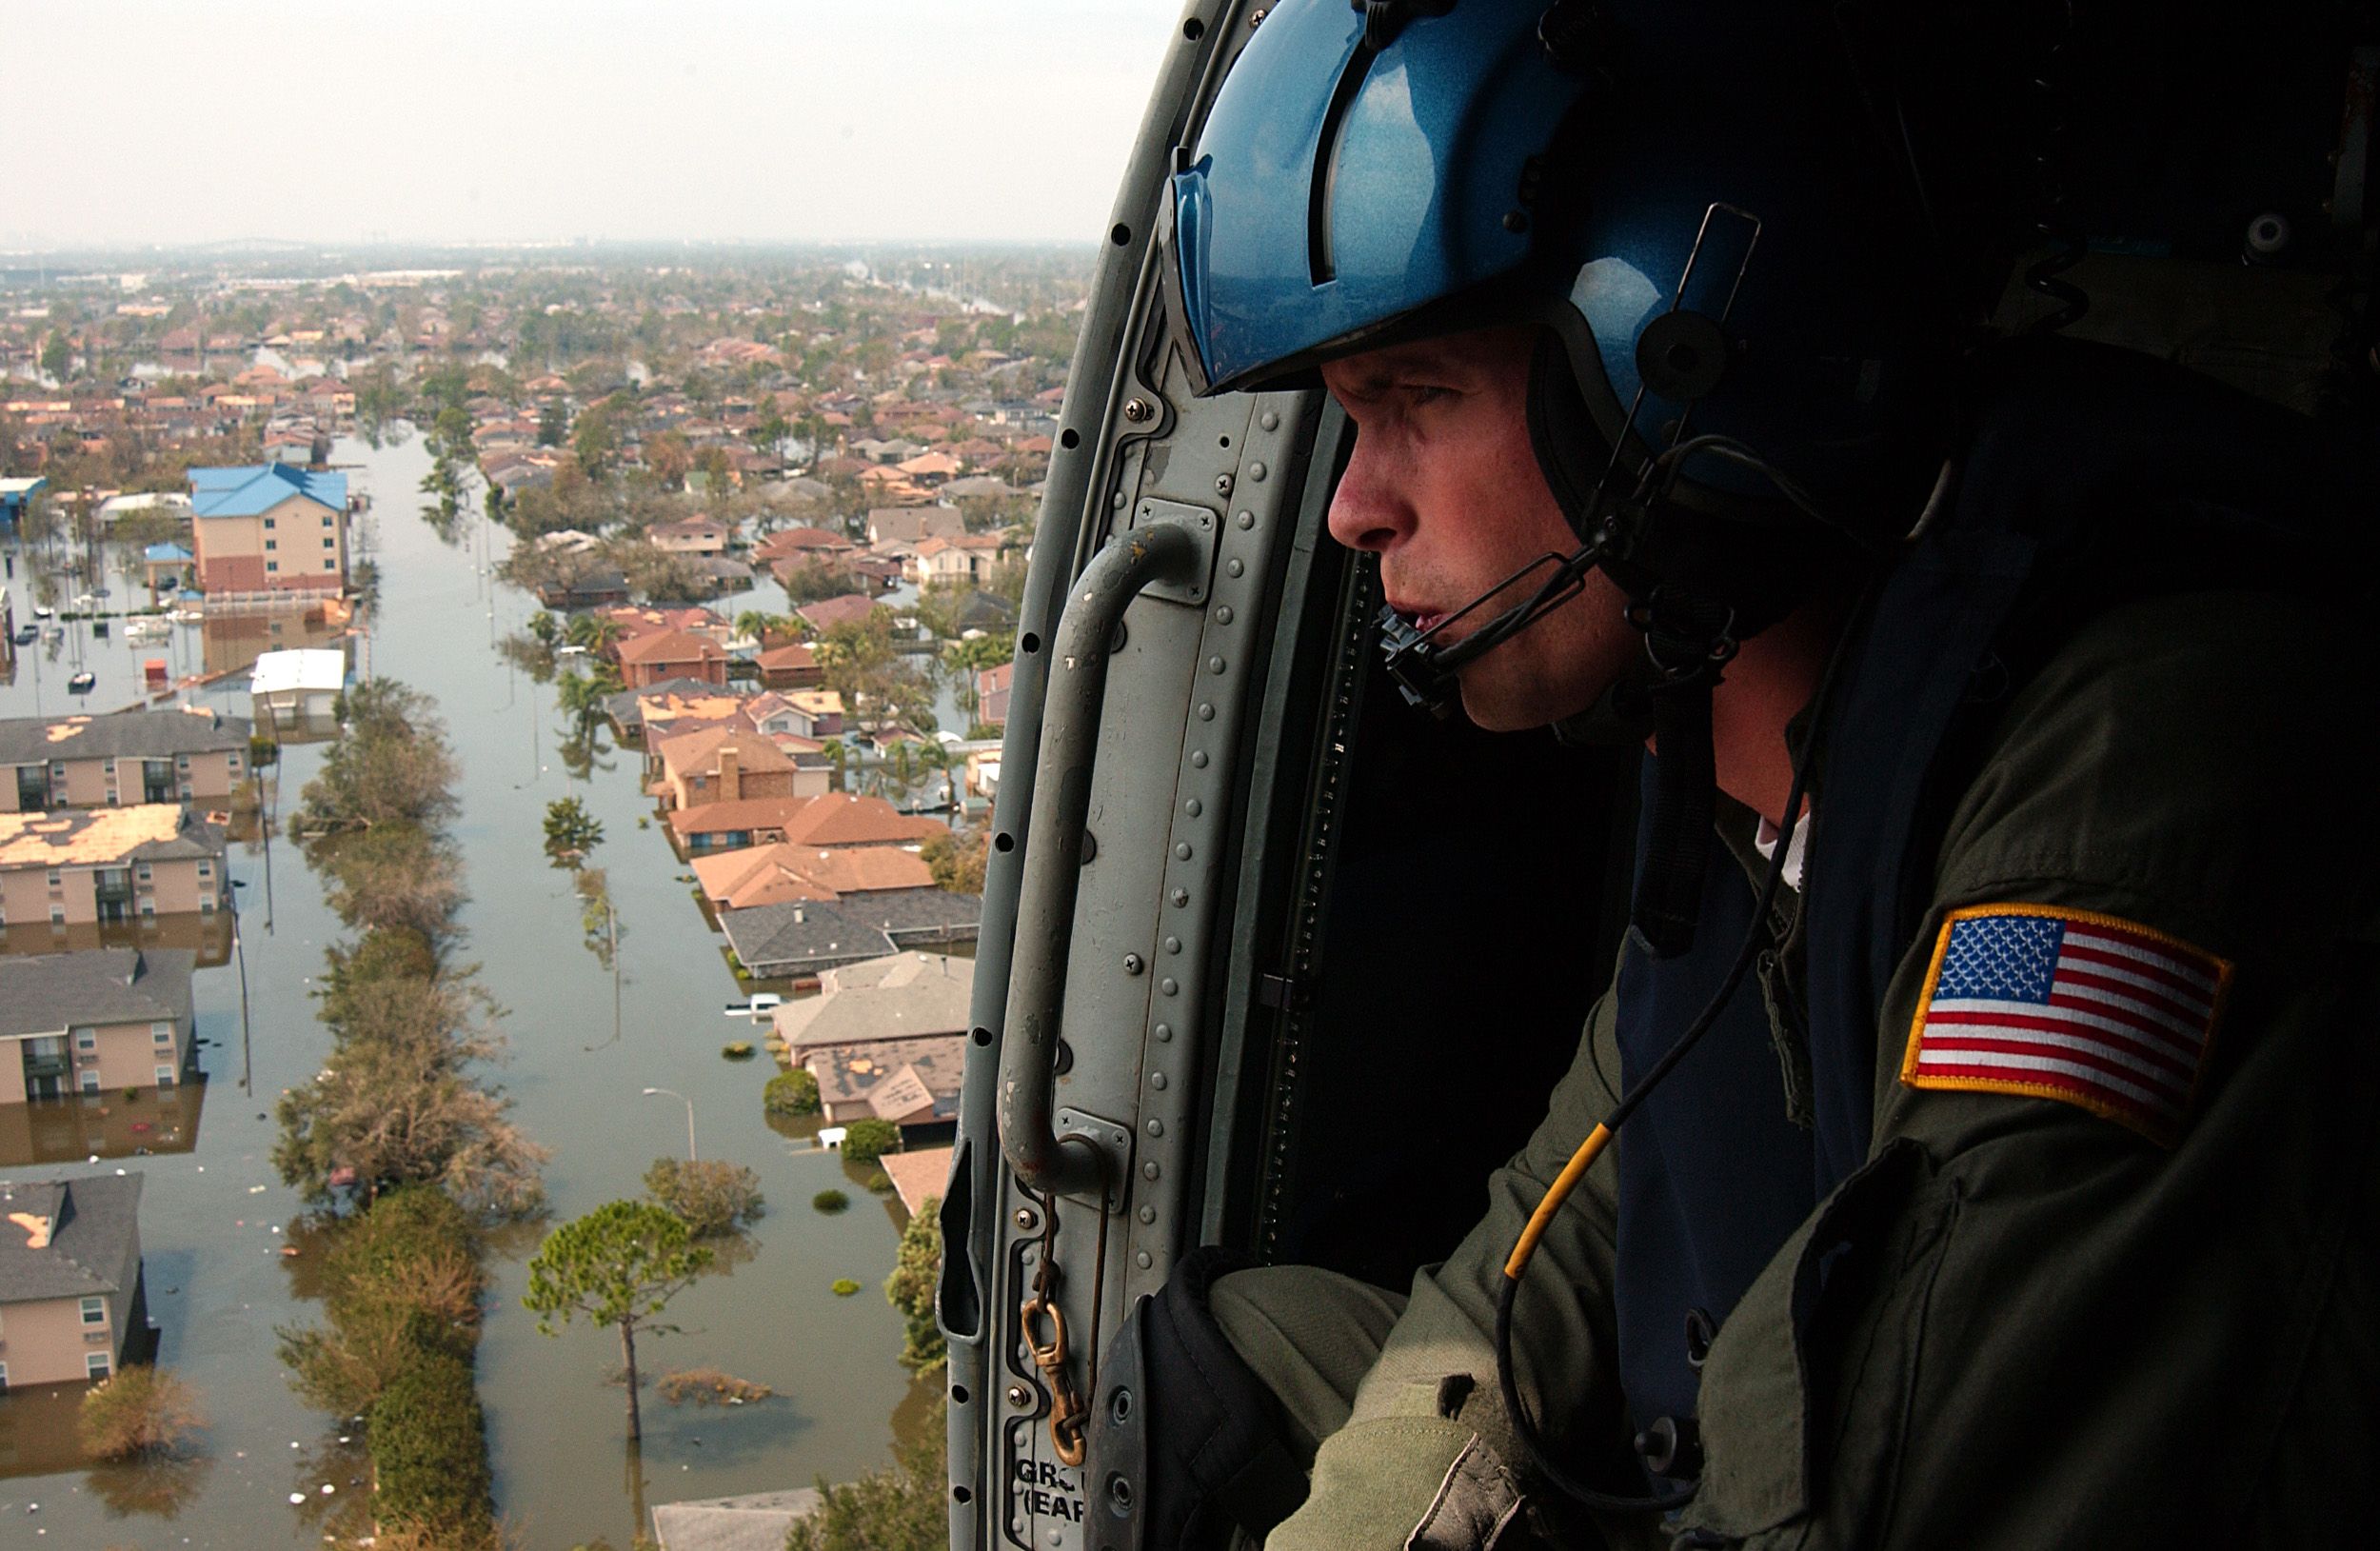 Coast Guard Petty Officer 2nd Class Shawn Beaty, 29, of Long Island, N.Y., looks for survivors in the wake of Hurricane Katrina, New Orleans, 2005 